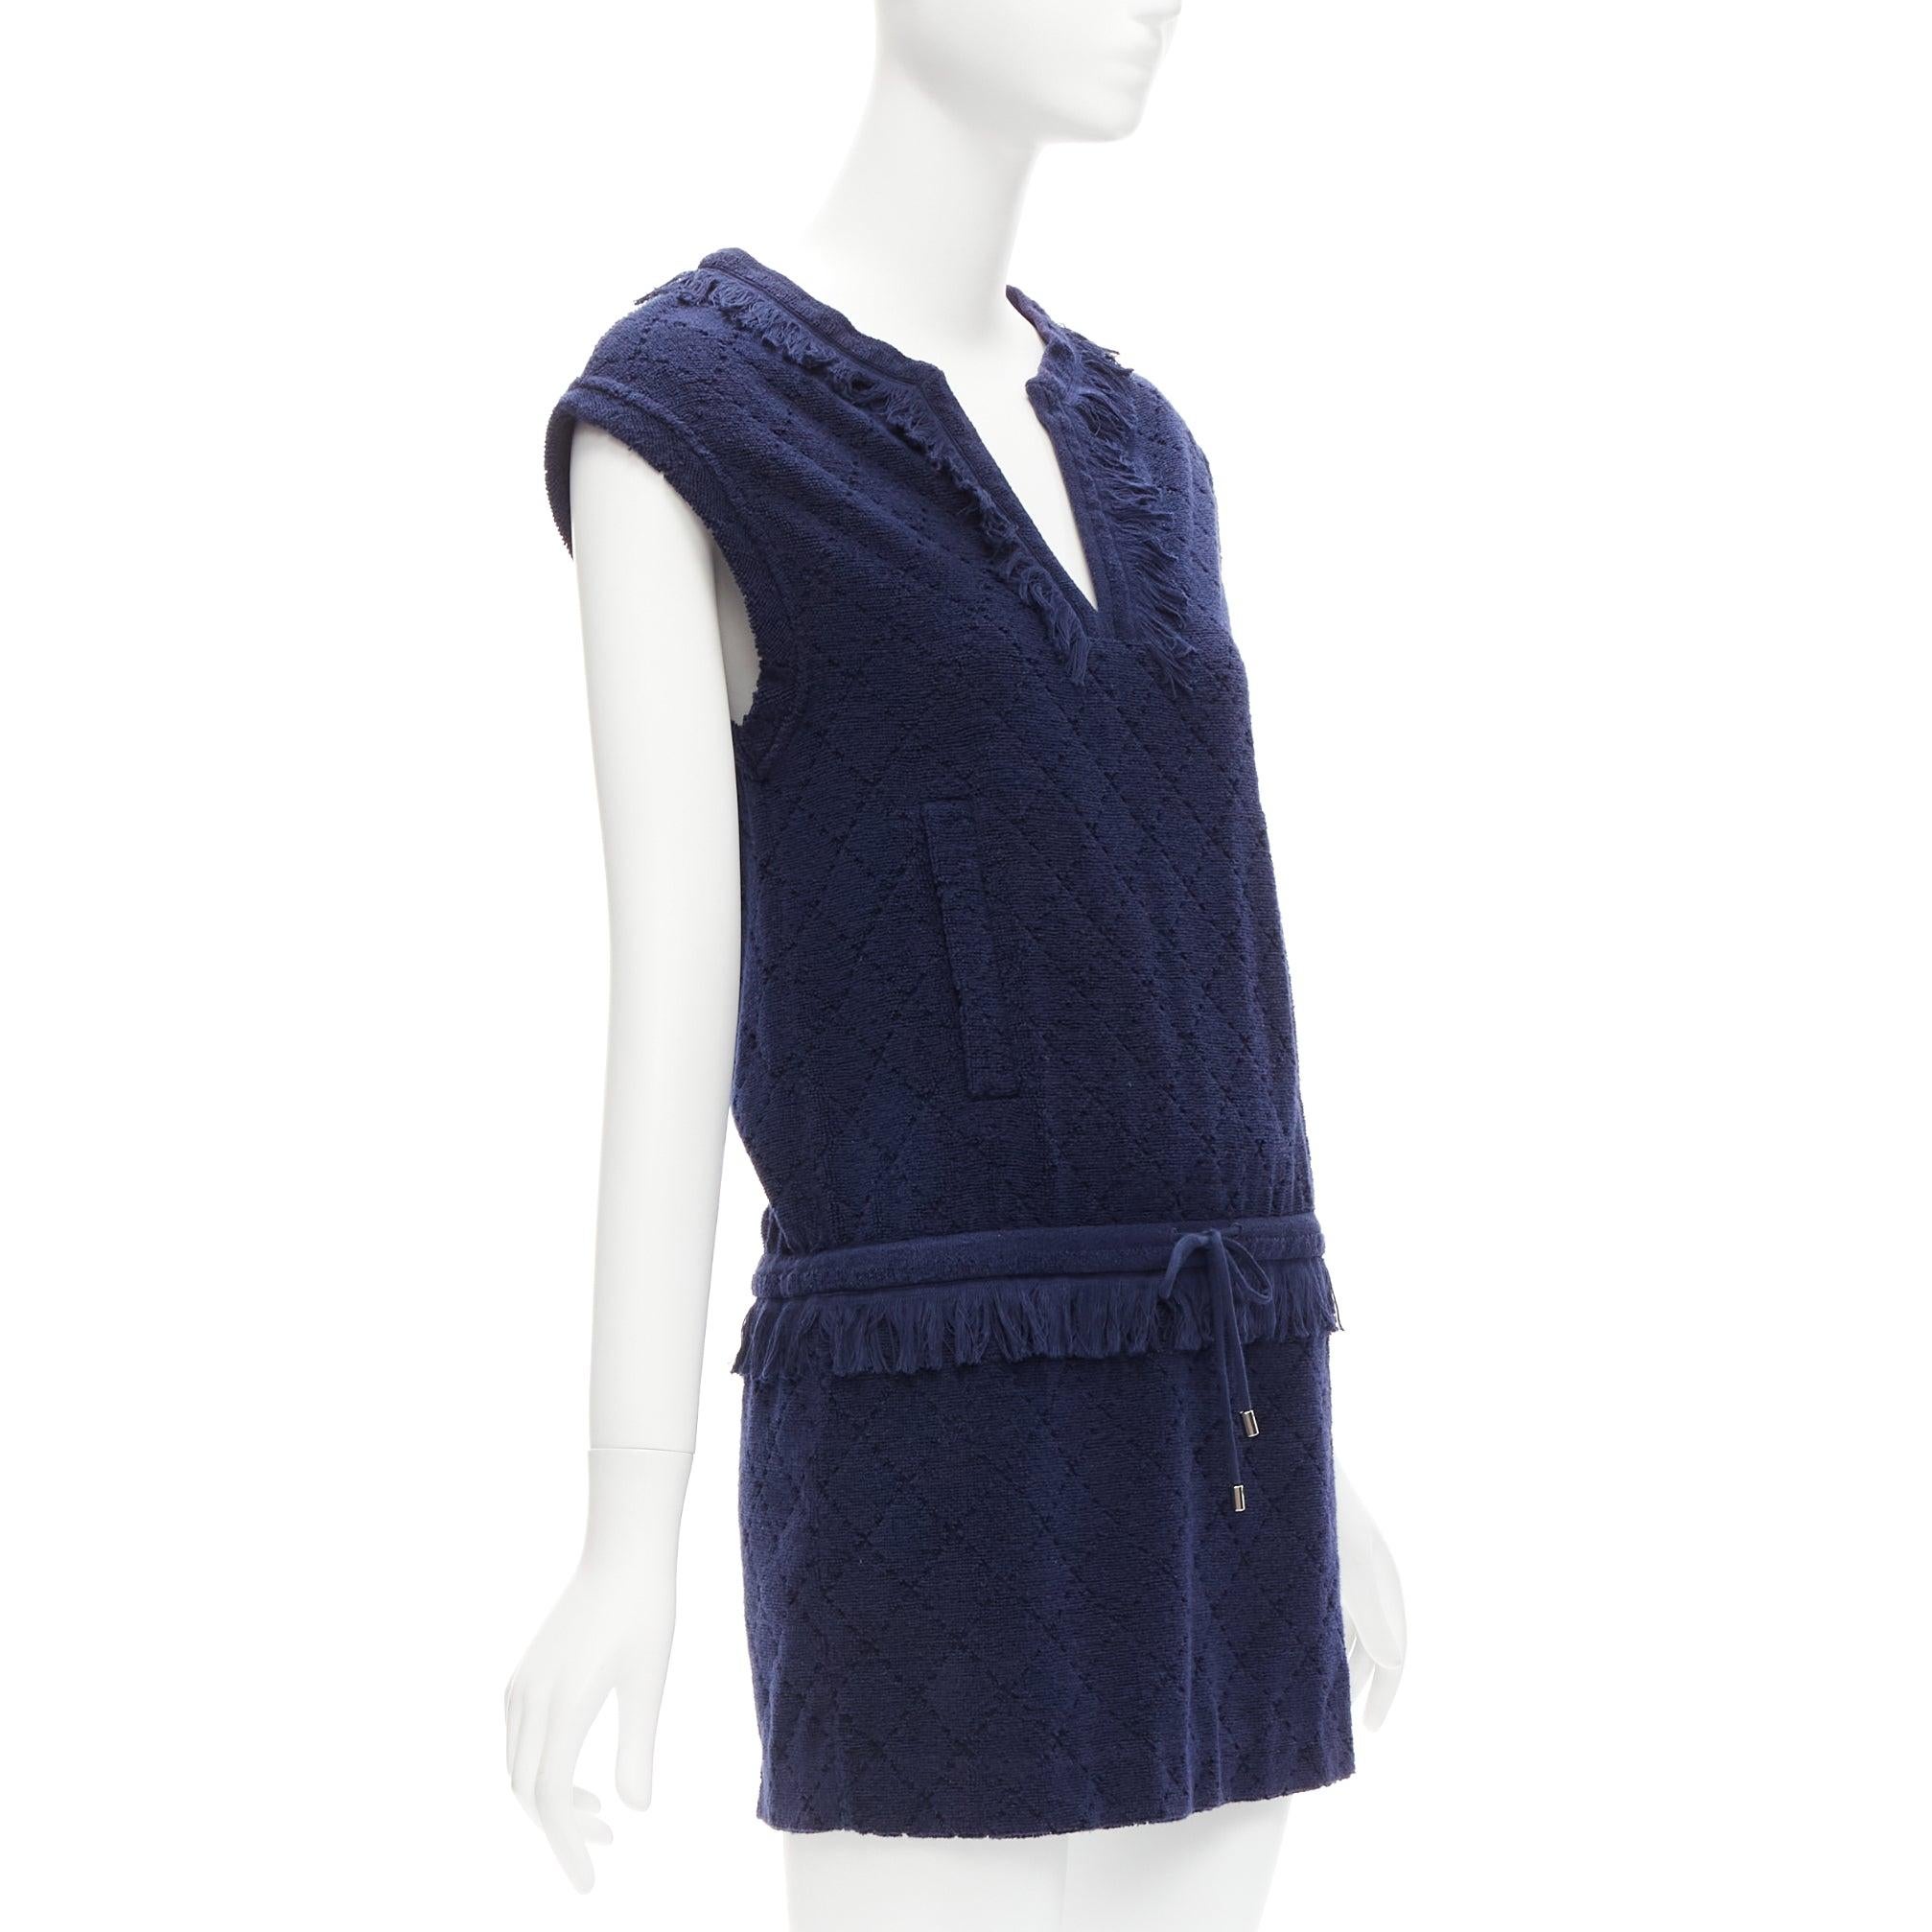 CHANEL navy CC logo diamond quilted terry cotton fringe trim mini dress FR34 XS
Reference: TGAS/D00886
Brand: Chanel
Designer: Karl Lagerfeld
Material: Cotton
Color: Navy
Pattern: Solid
Closure: Drawstring
Extra Details: Drawstring waist. CC logo at